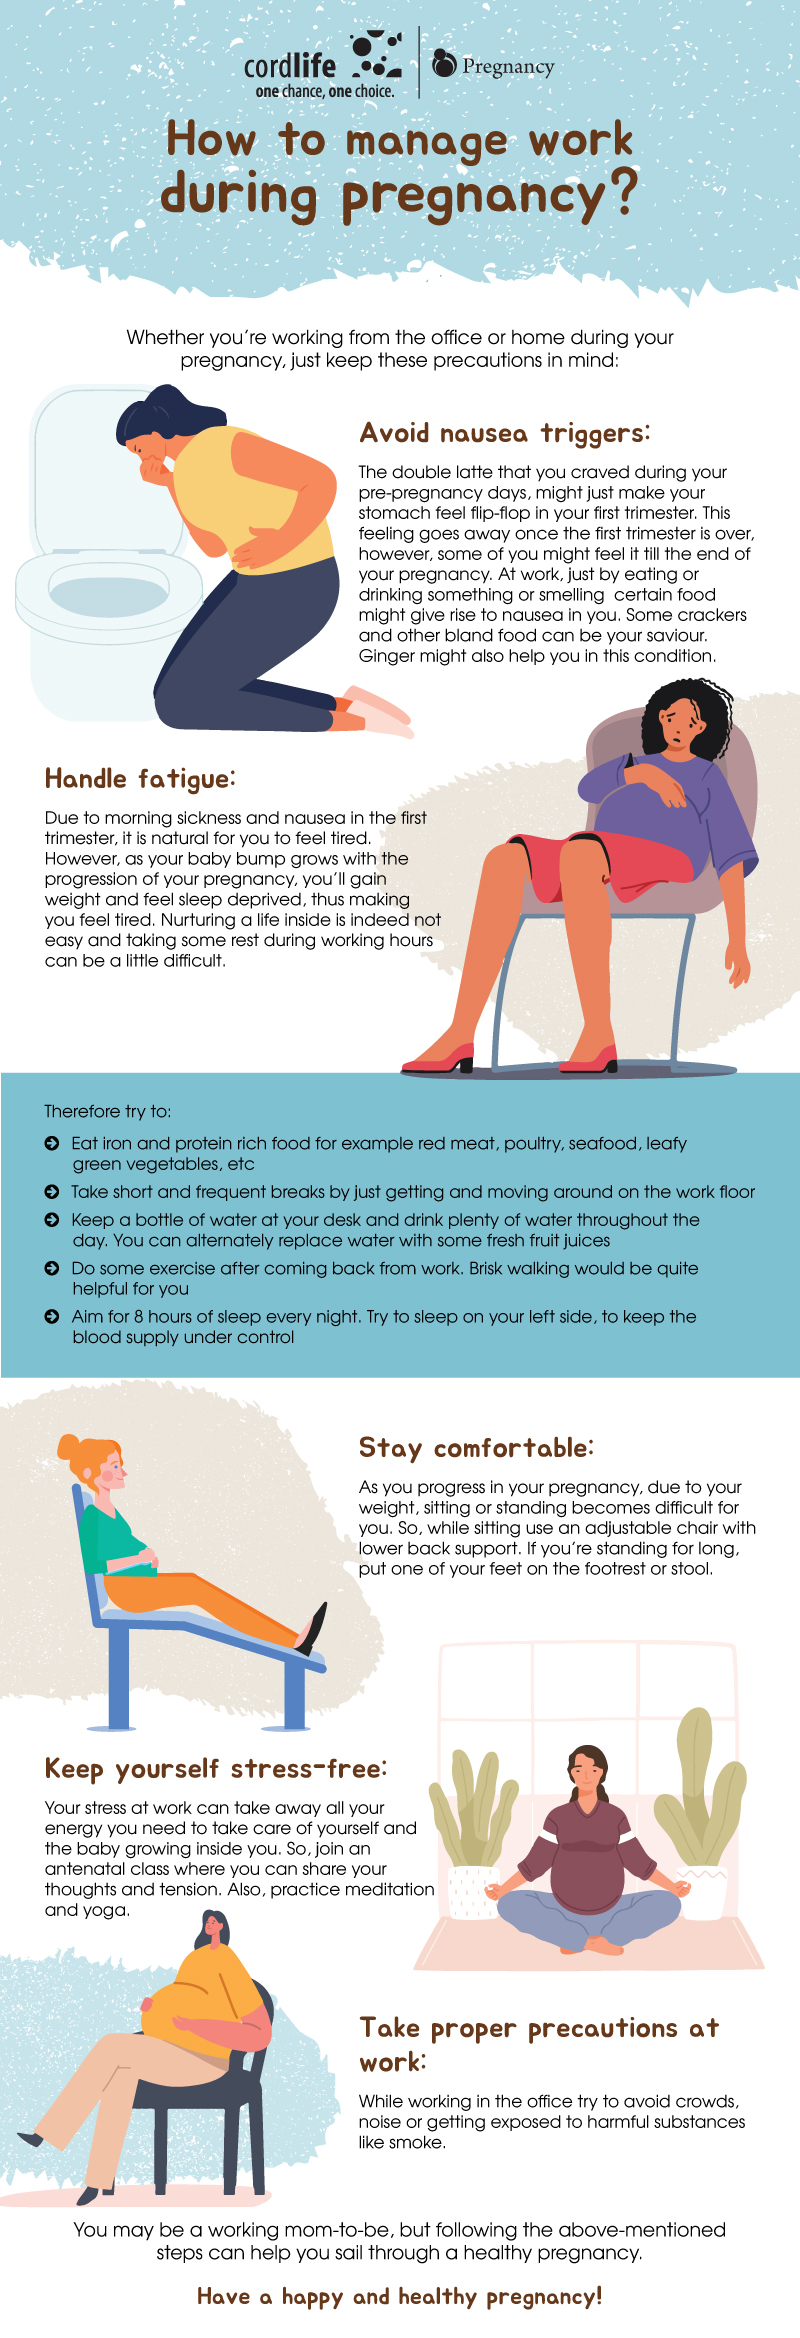 How to manage work during pregnancy